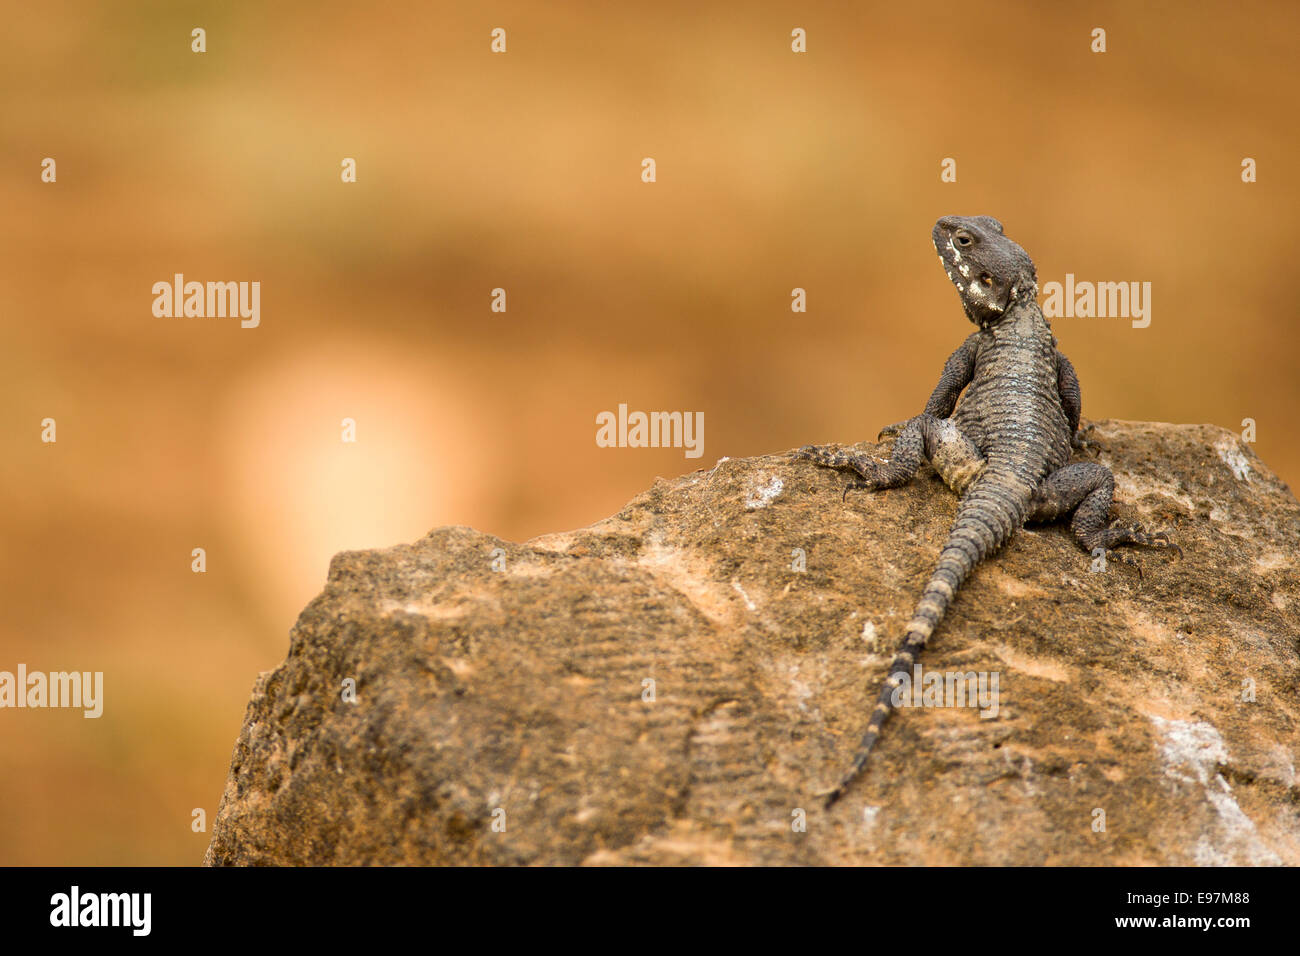 Stellagama (Stellagama stellio) AKA stellion, hardim, hardun, star lizard, painted dragon, starred agama, sling-tailed agama and Stock Photo